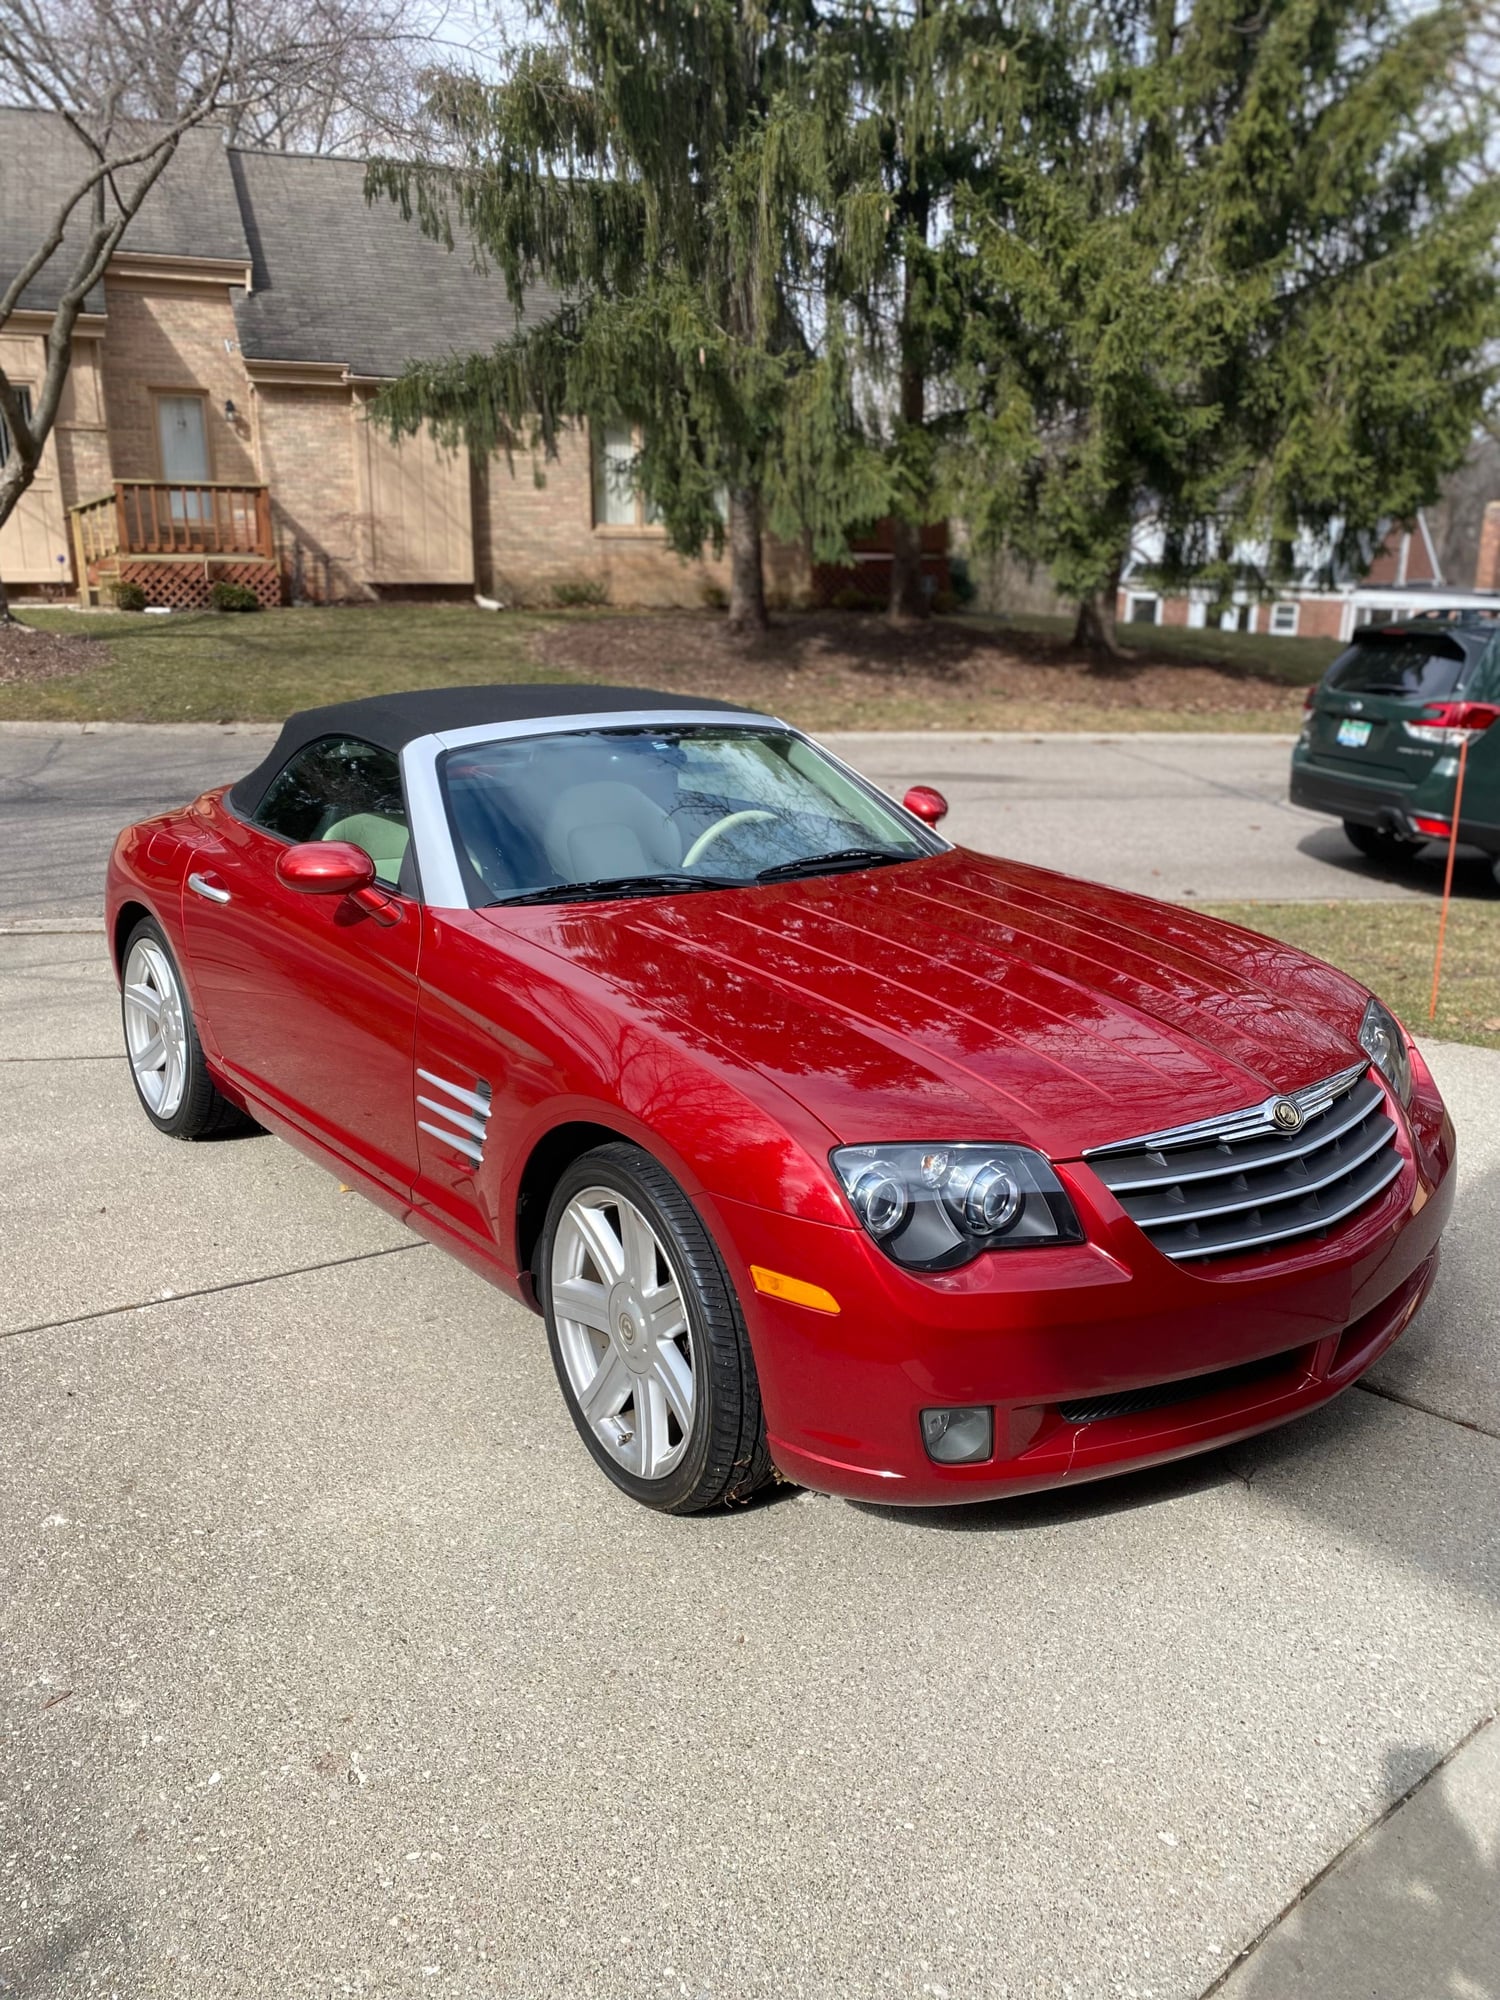 2007 Chrysler Crossfire - 2007 Crossfire Limited Roadster Convertible - Used - VIN 1C3LN65L57X070006 - 6 cyl - 2WD - Automatic - Convertible - Red - Troy, MI 48085, United States